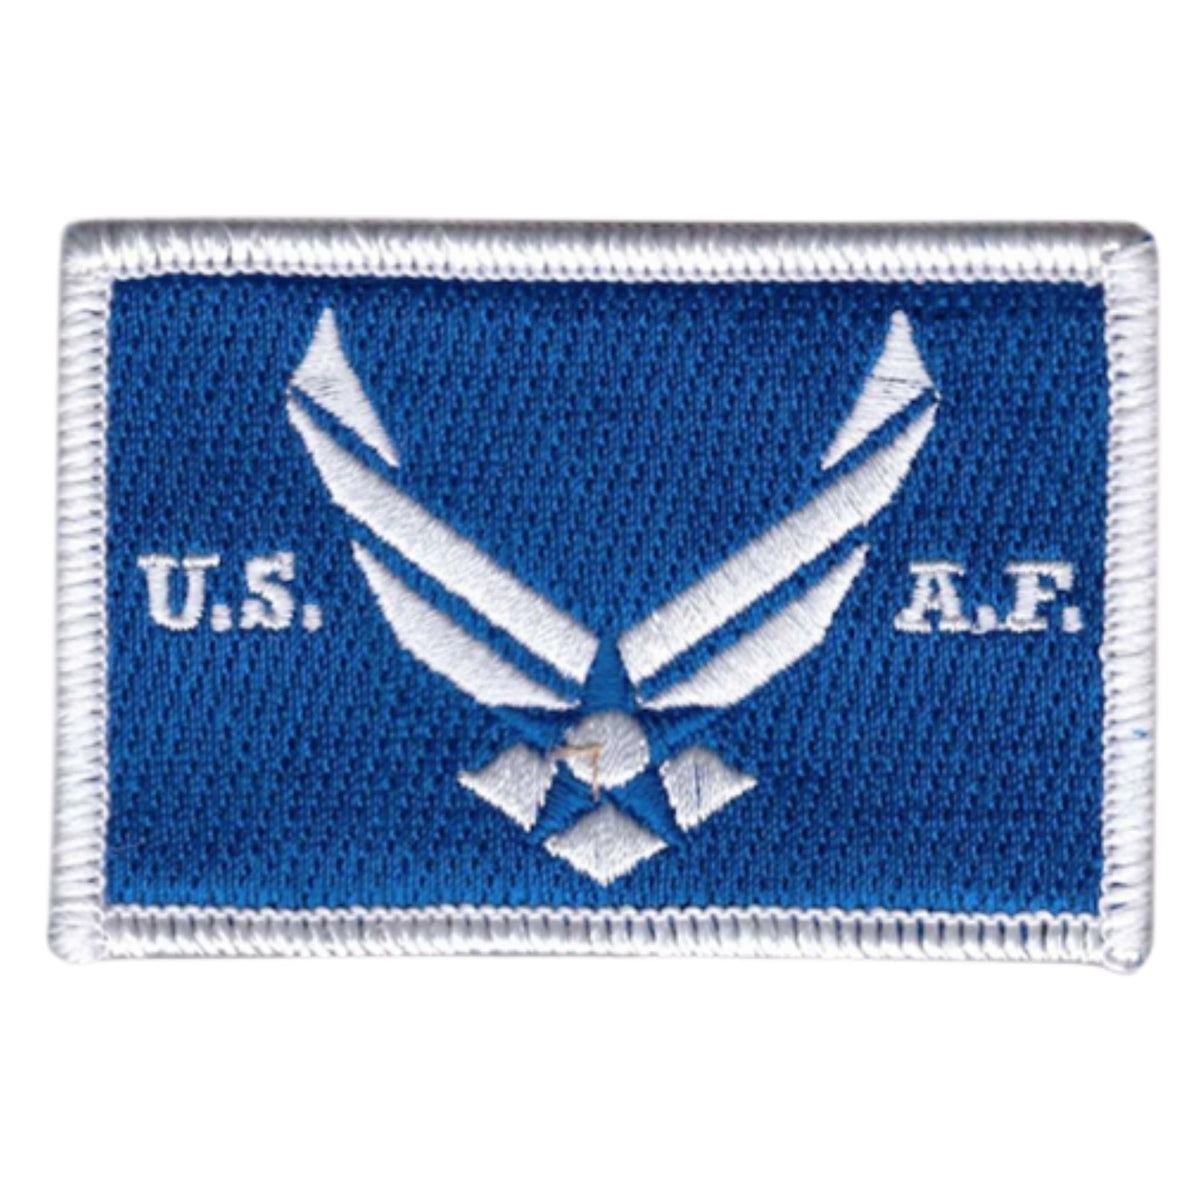 US Army Patch - Full Color